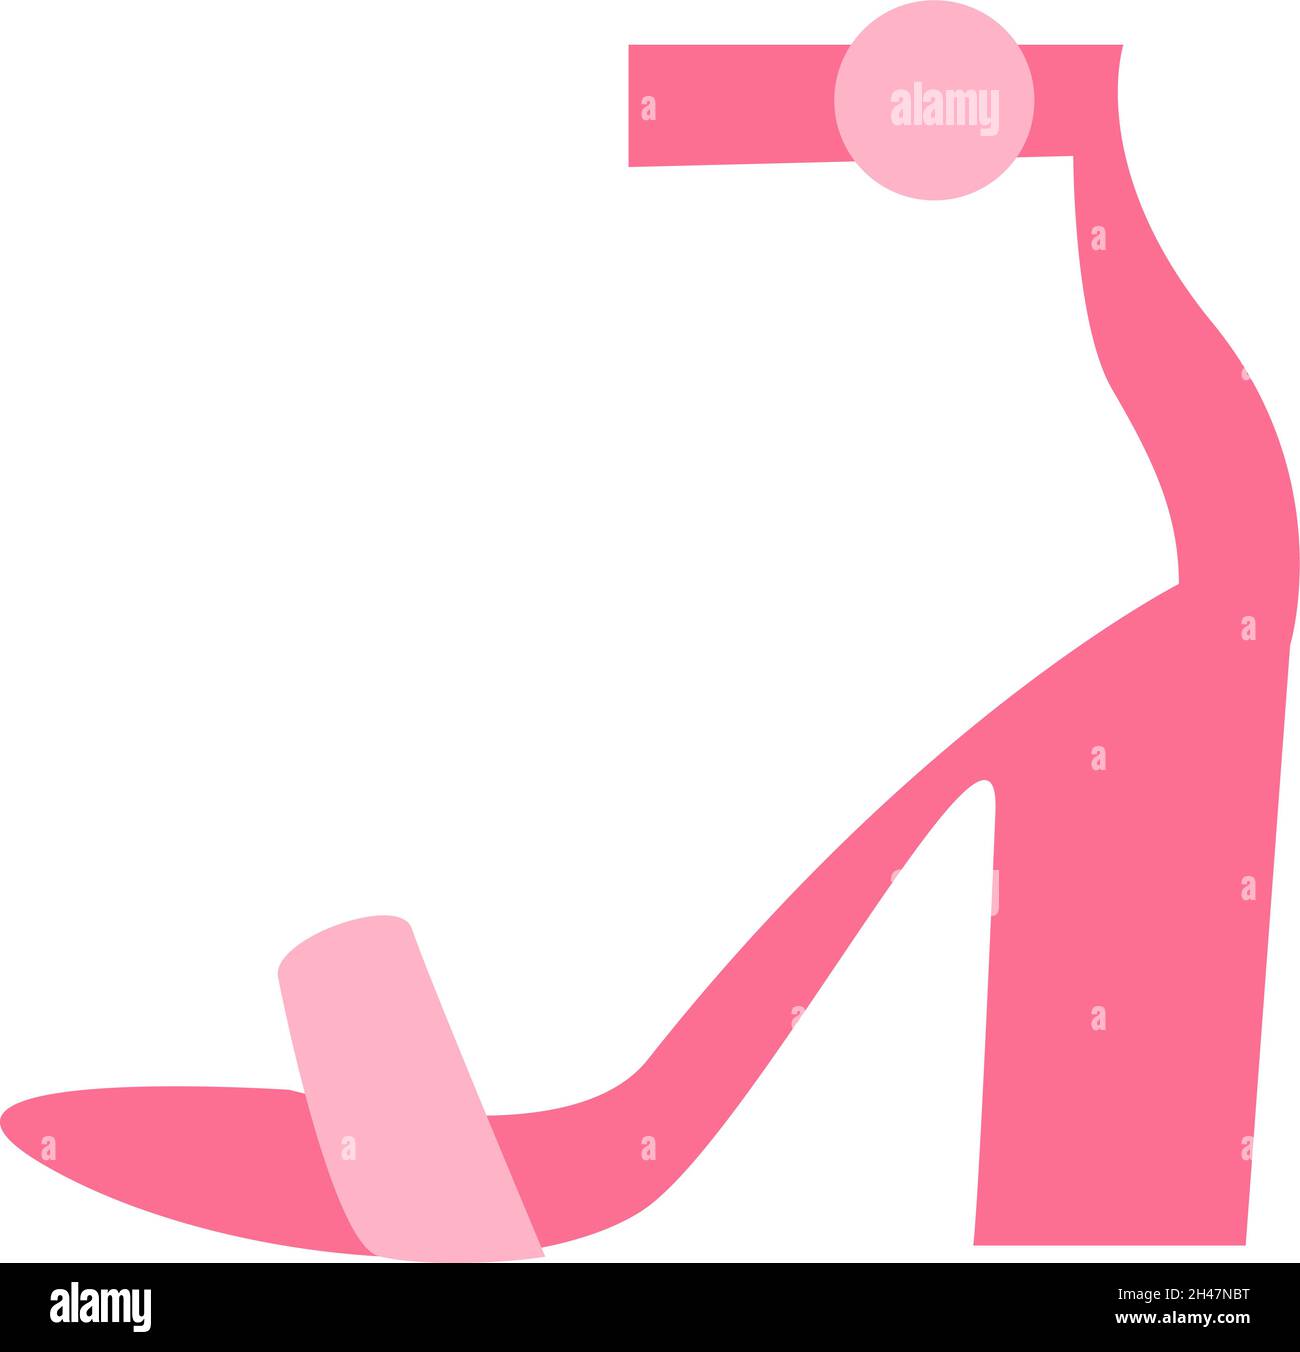 Girly high heel, illustration, vector, on a white background. Stock Vector